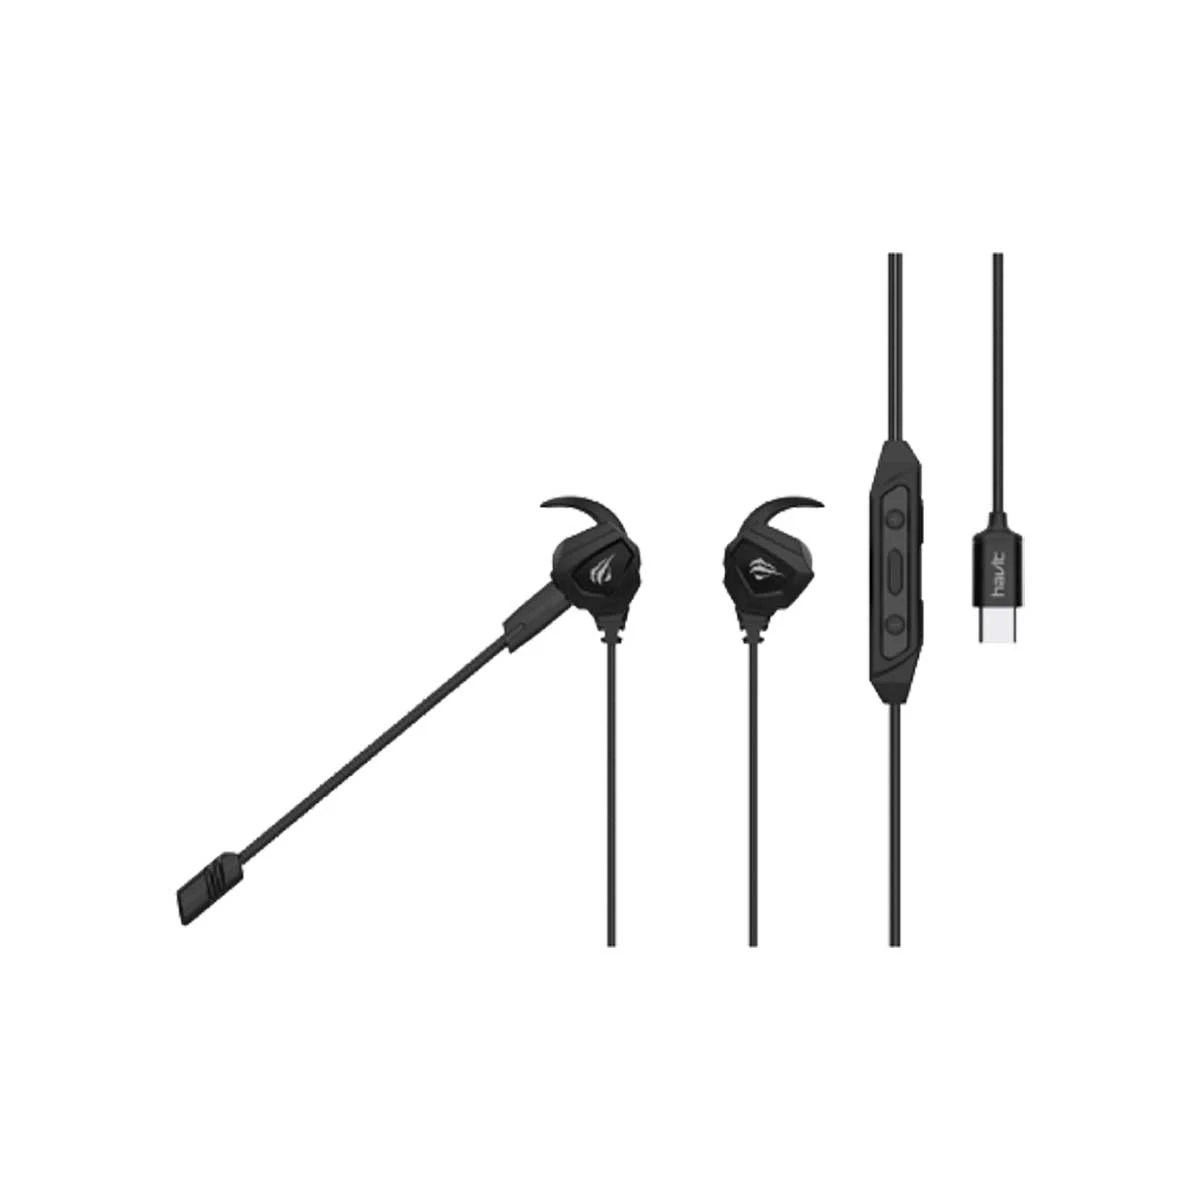 Havit GE06 In-Ear Wired Black Gaming Earphone for Type-C Device